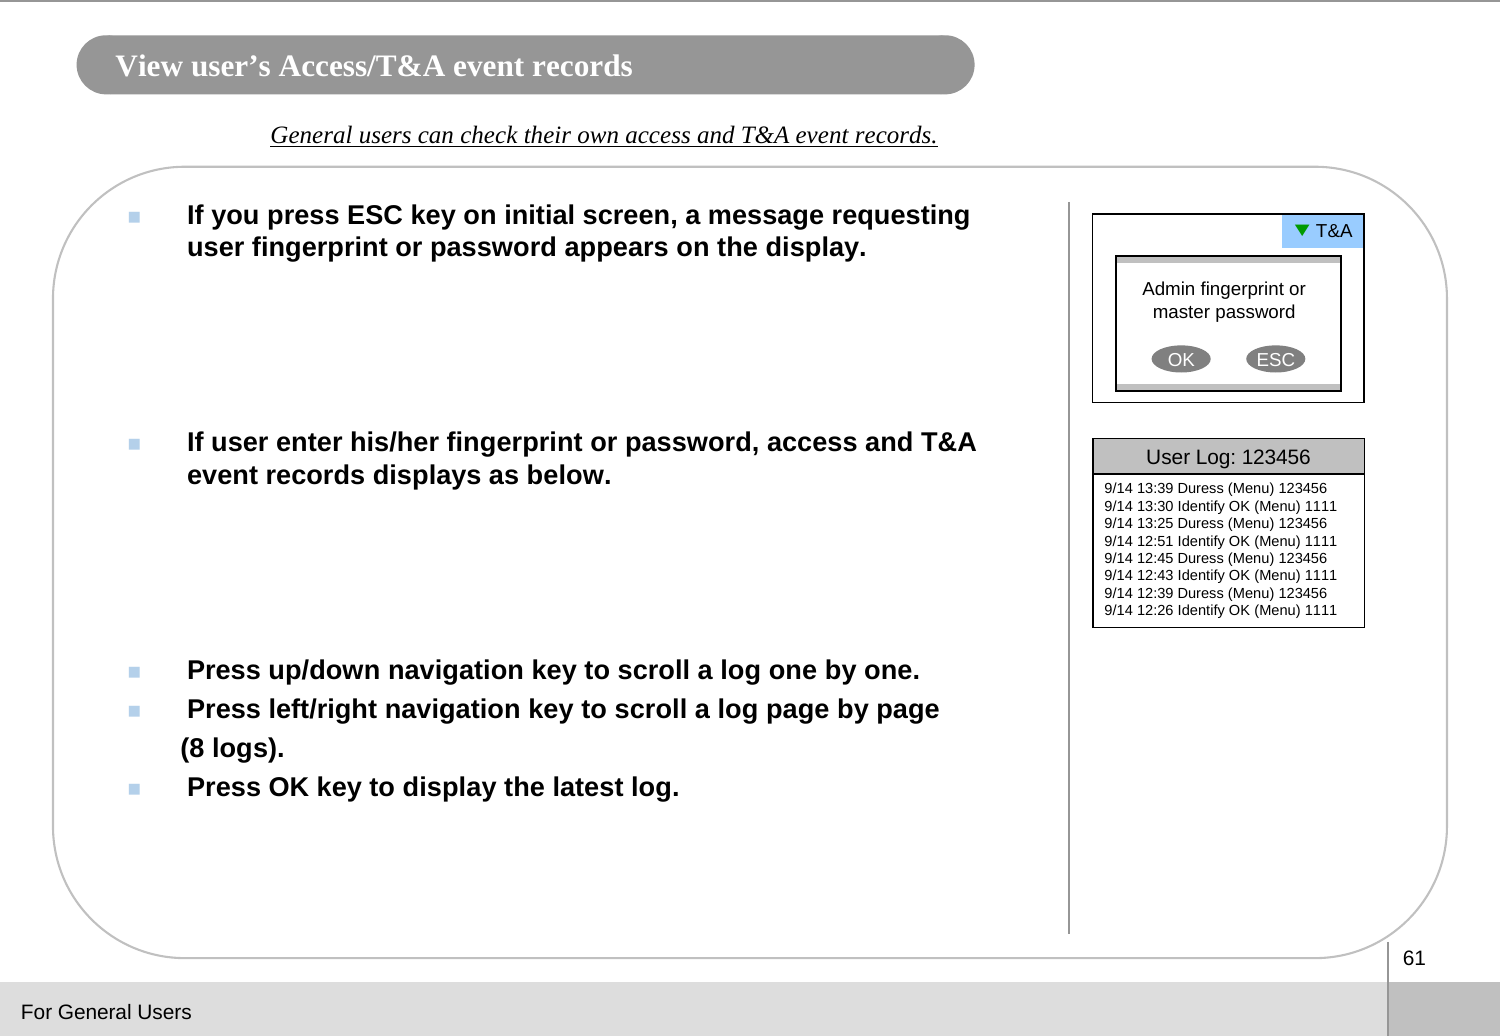 61View user’s Access/T&amp;A event recordsIf you press ESC key on initial screen, a message requesting user fingerprint or password appears on the display.If user enter his/her fingerprint or password, access and T&amp;A event records displays as below. Press up/down navigation key to scroll a log one by one.Press left/right navigation key to scroll a log page by page (8 logs).Press OK key to display the latest log.General users can check their own access and T&amp;A event records.Admin fingerprint or master passwordOK ESC▼T&amp;AUser Log: 1234569/14 13:39 Duress (Menu) 1234569/14 13:30 Identify OK (Menu) 11119/14 13:25 Duress (Menu) 1234569/14 12:51 Identify OK (Menu) 11119/14 12:45 Duress (Menu) 1234569/14 12:43 Identify OK (Menu) 11119/14 12:39 Duress (Menu) 1234569/14 12:26 Identify OK (Menu) 1111For General Users